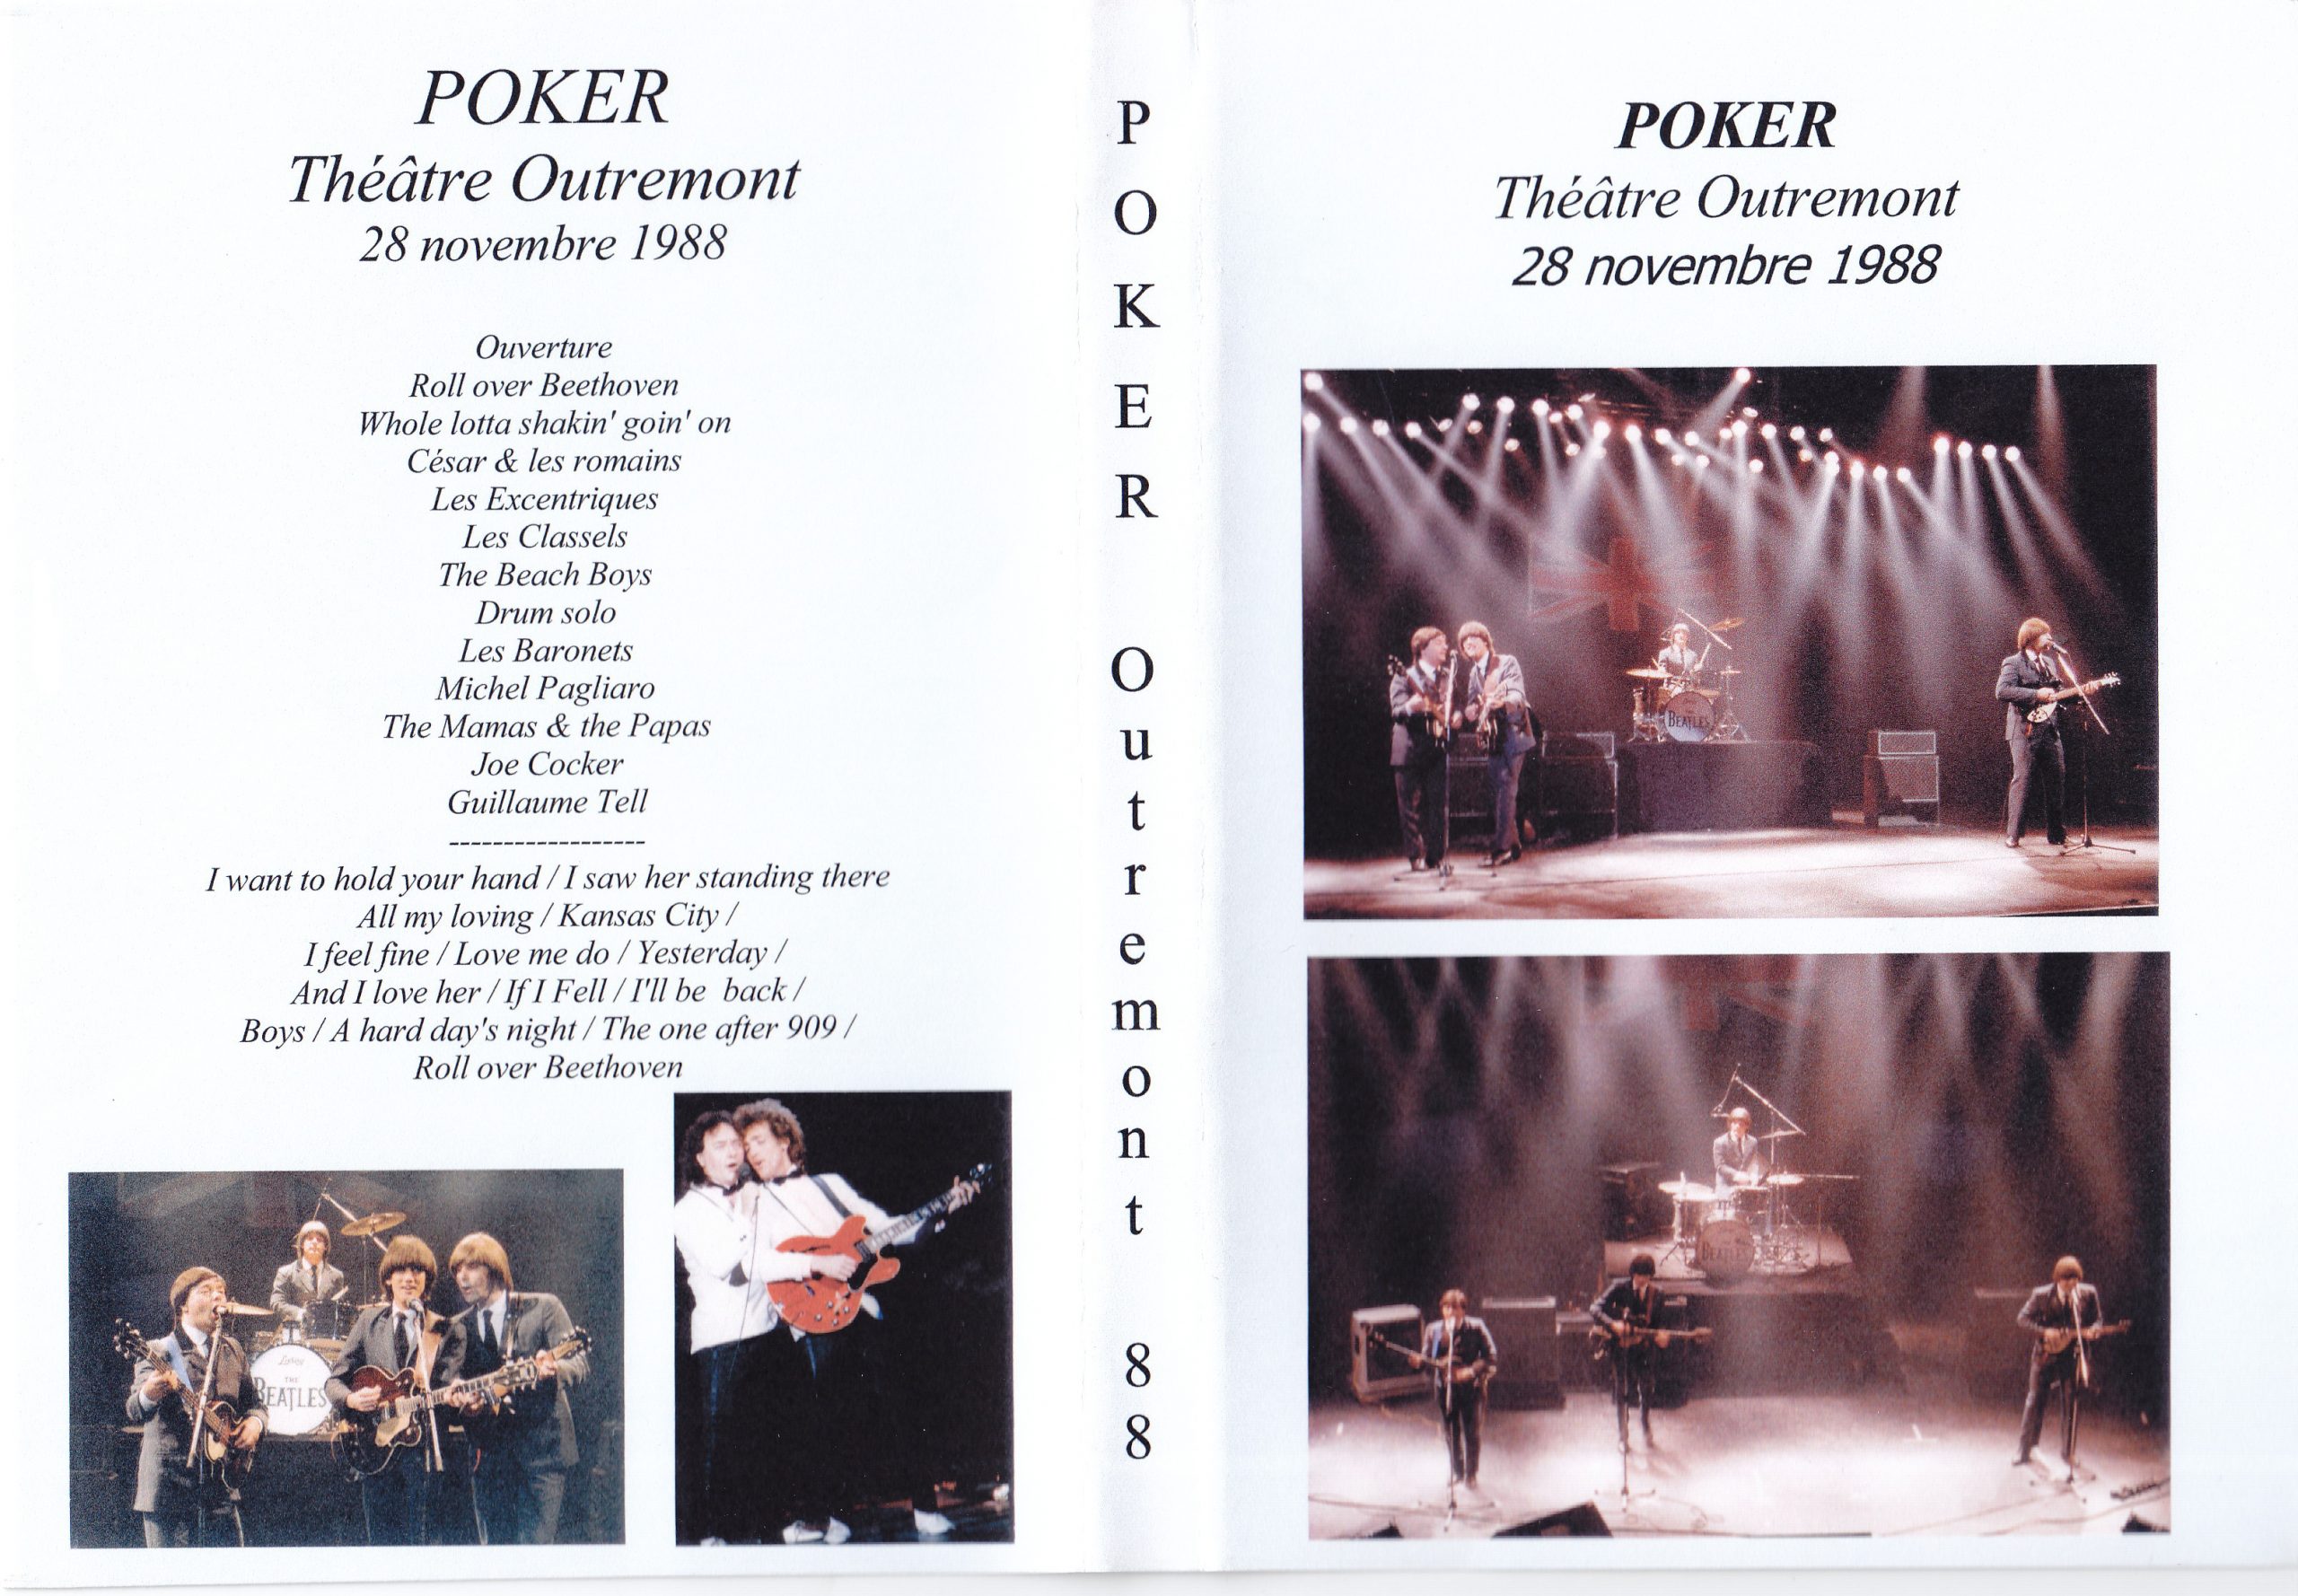 1988-poker-theatre-outremont